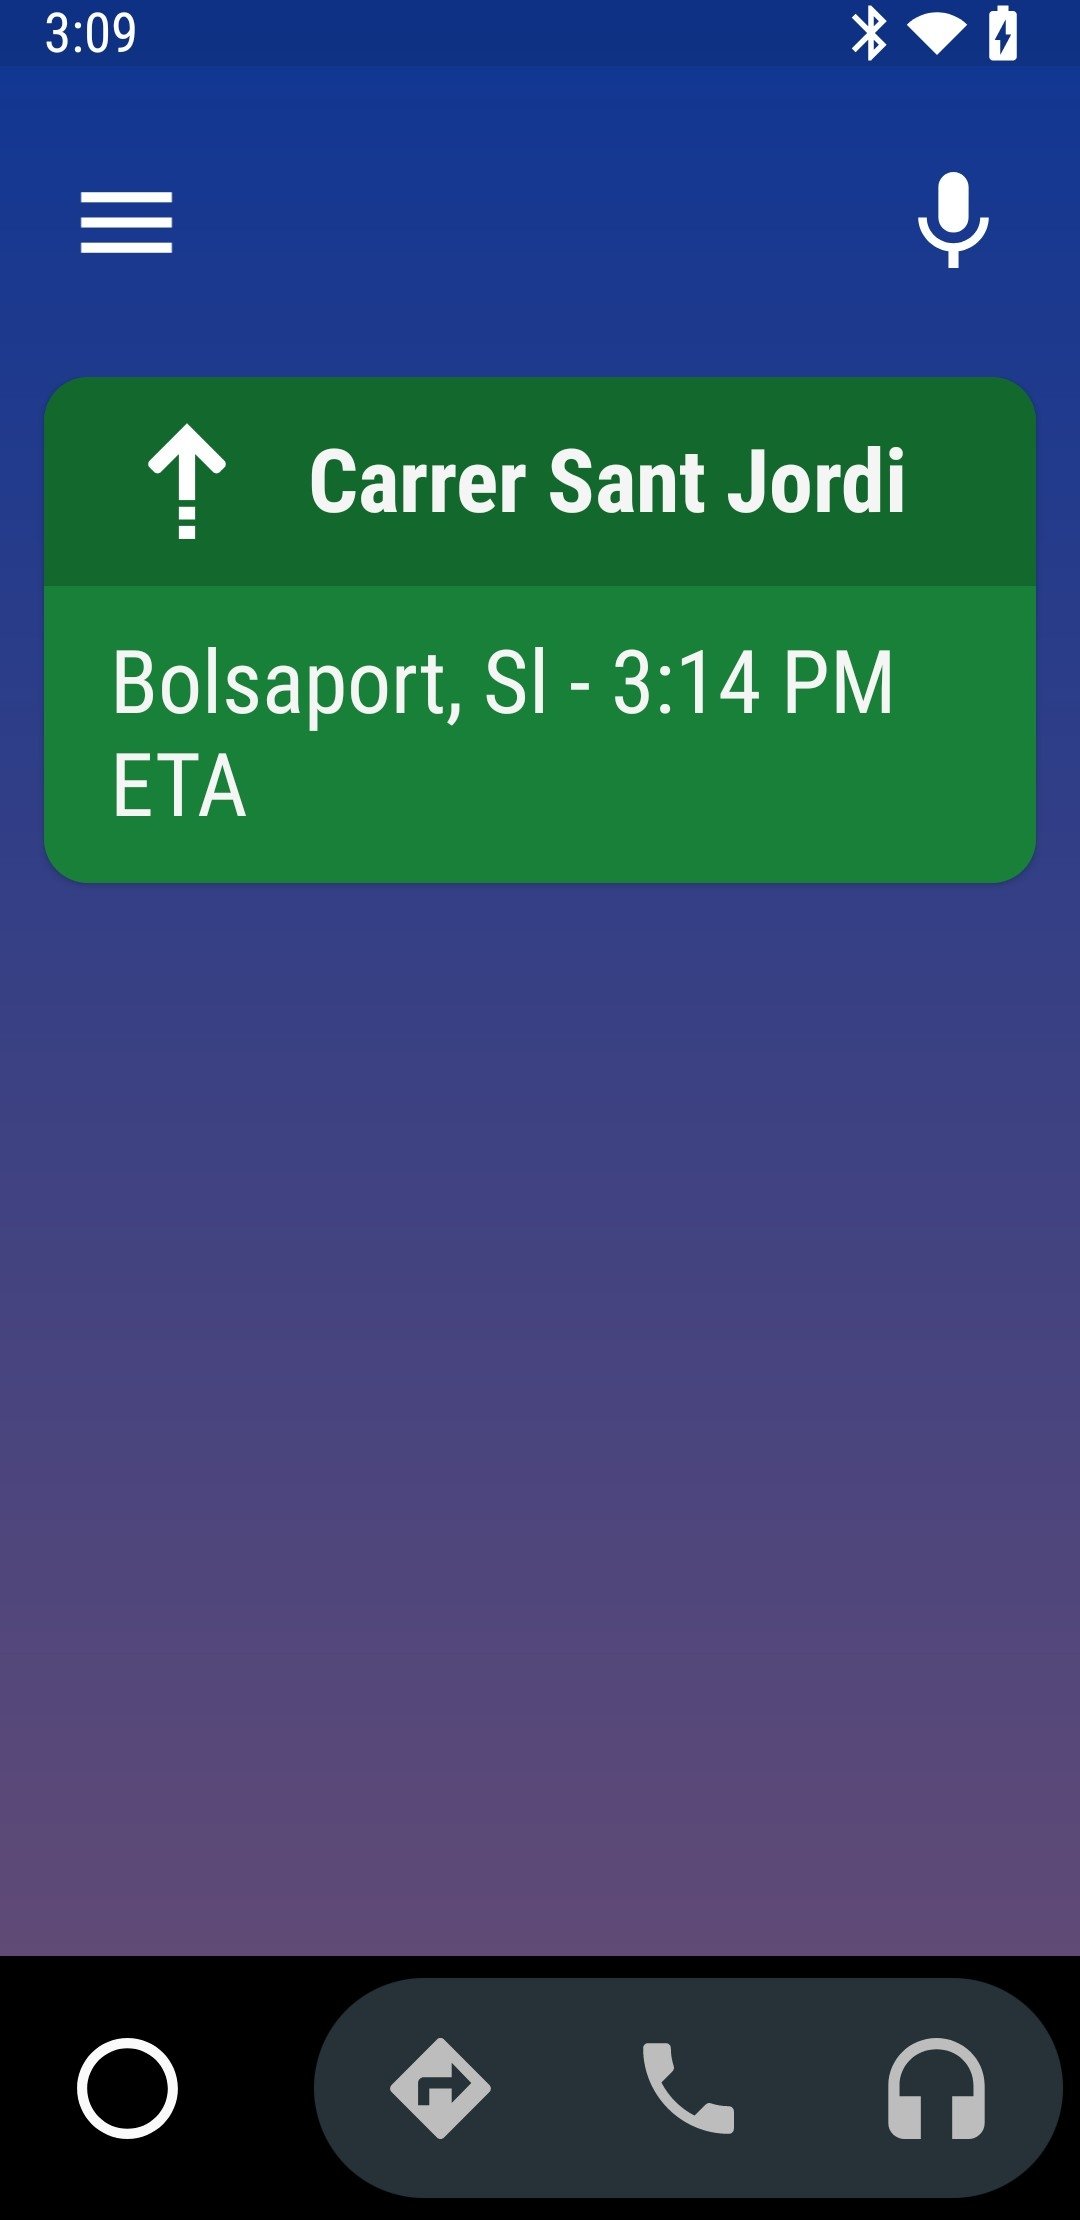 download android auto app